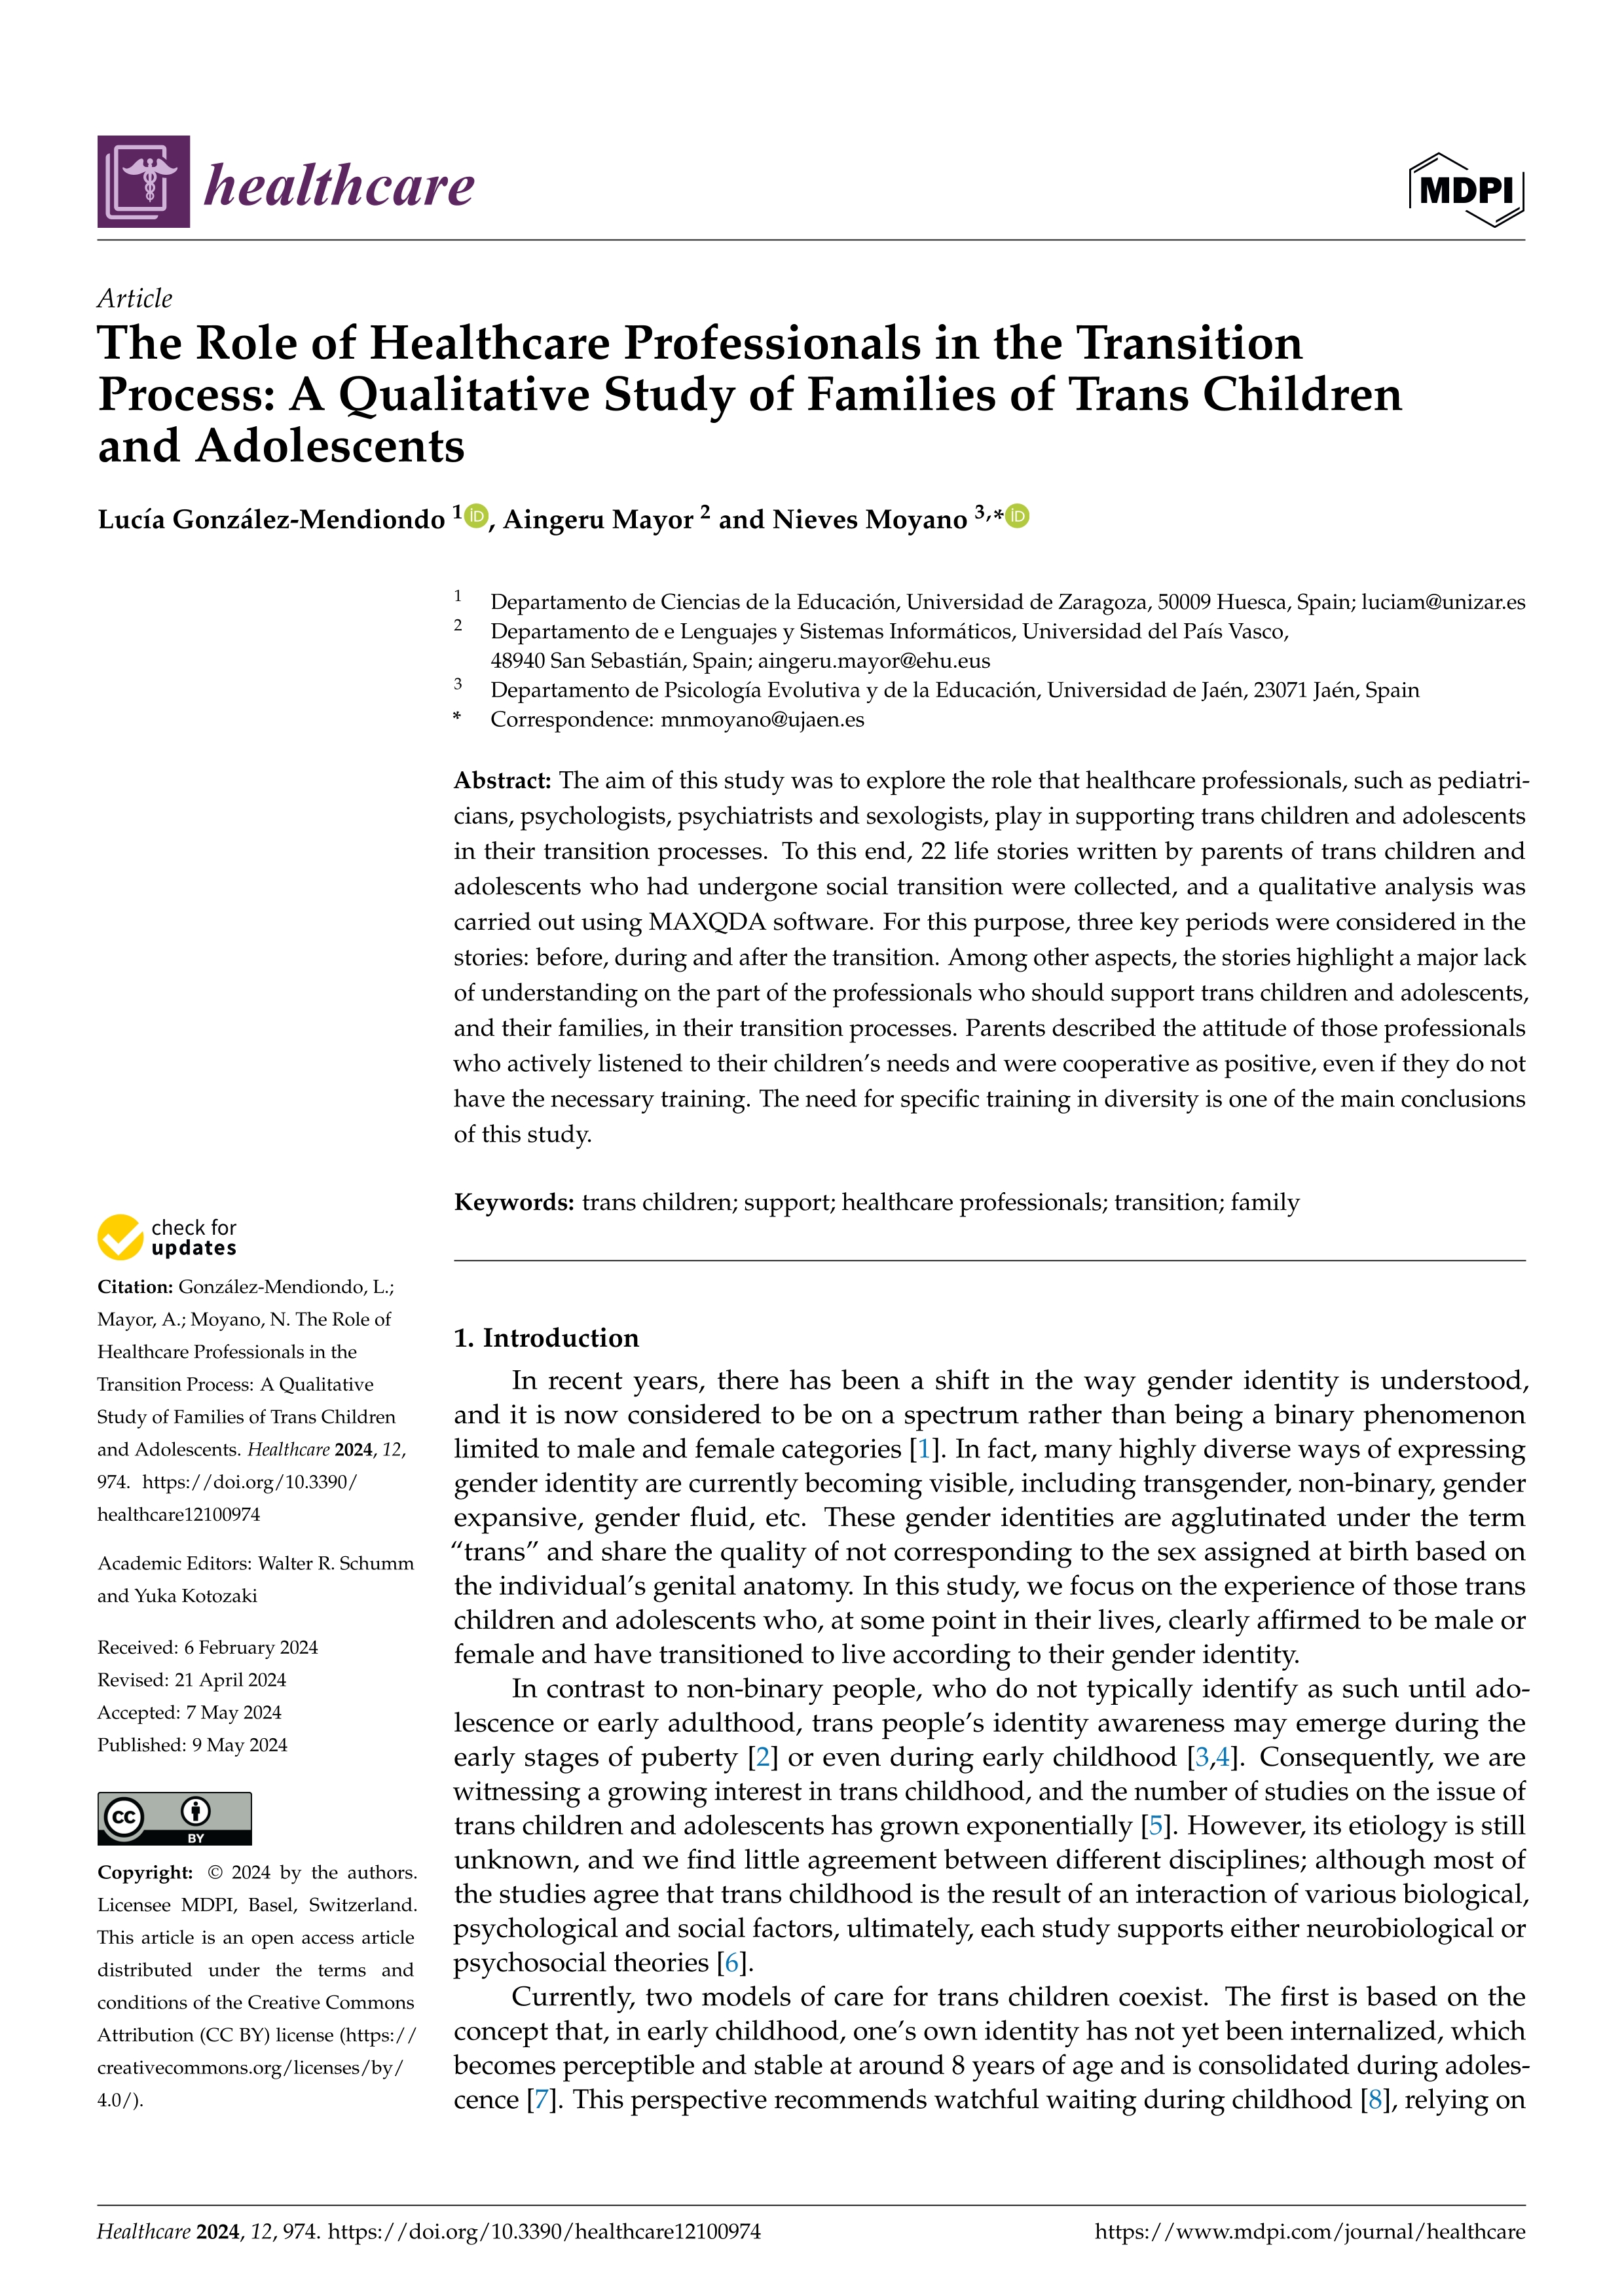 The Role of Healthcare Professionals in the Transition Process: A Qualitative Study of Families of Trans Children and Adolescents